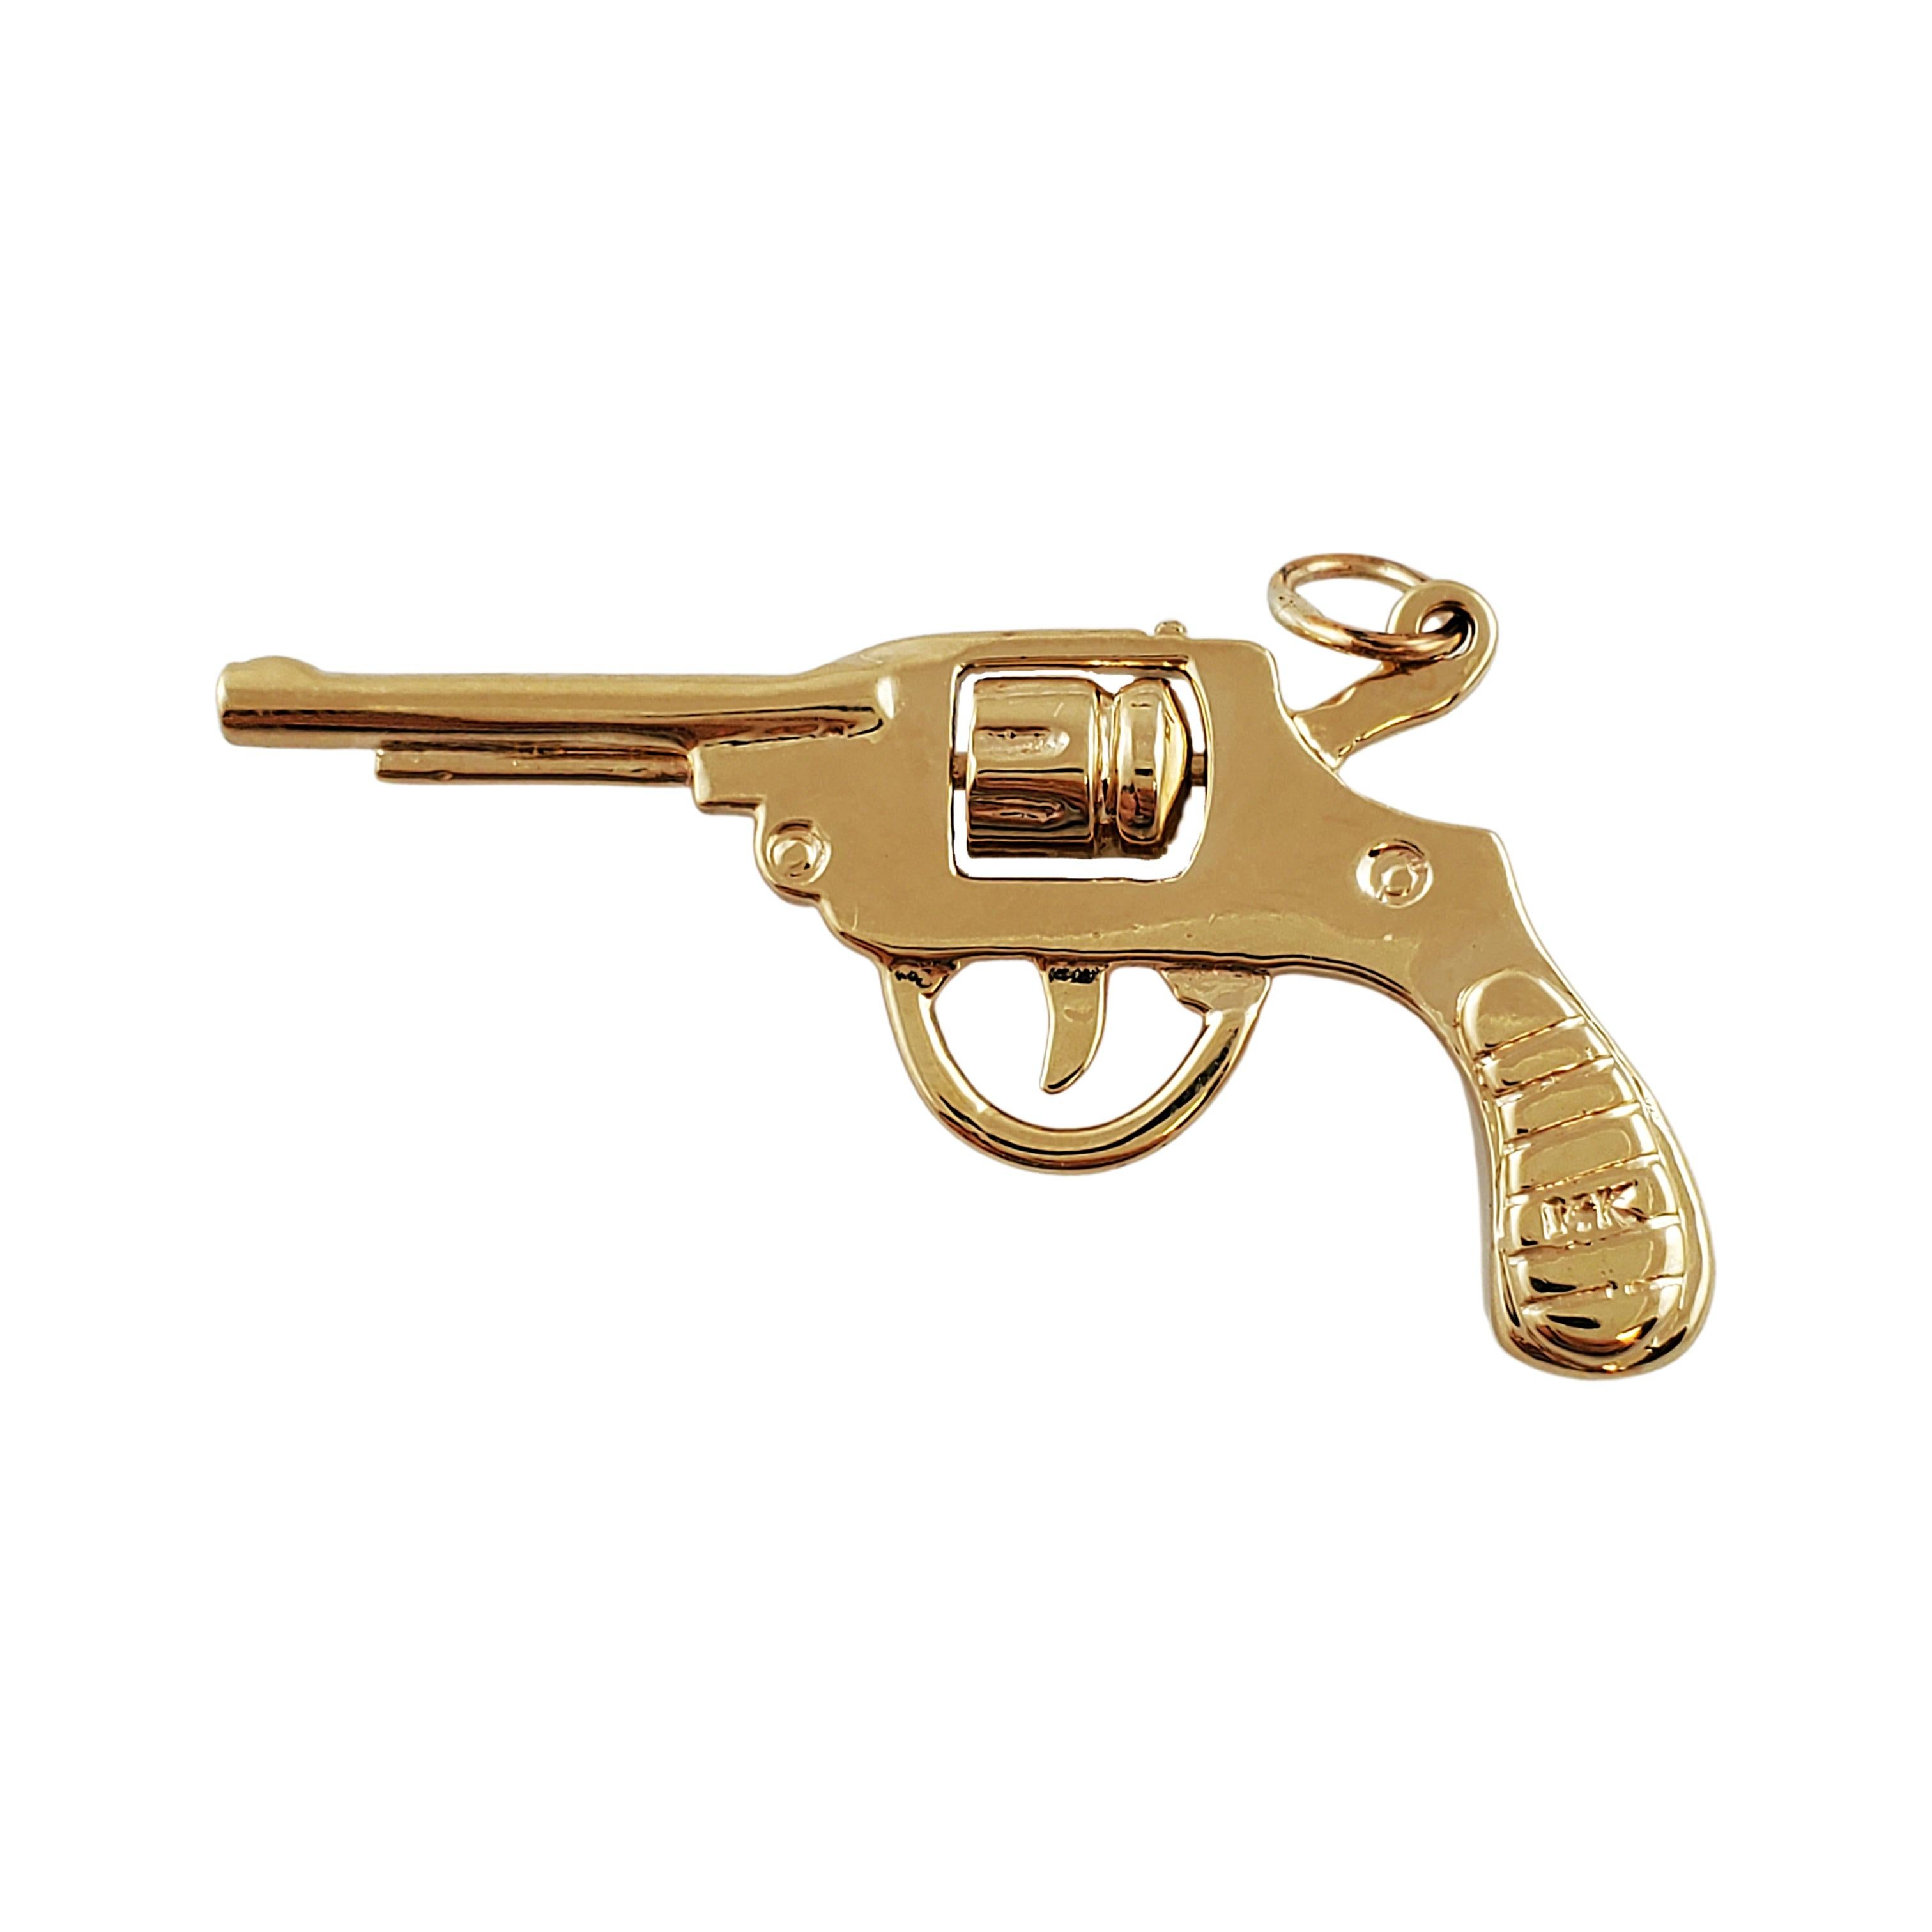 Vintage 14K Yellow Gold Hand Gun Charm

Take a shot at this charm!

Beautiful hand gun charm depicts a classic revolver gun with a mechanical cylinder that spins. This charm is crafted in 14k yellow gold.

Chain not included!

Size: 20mm X